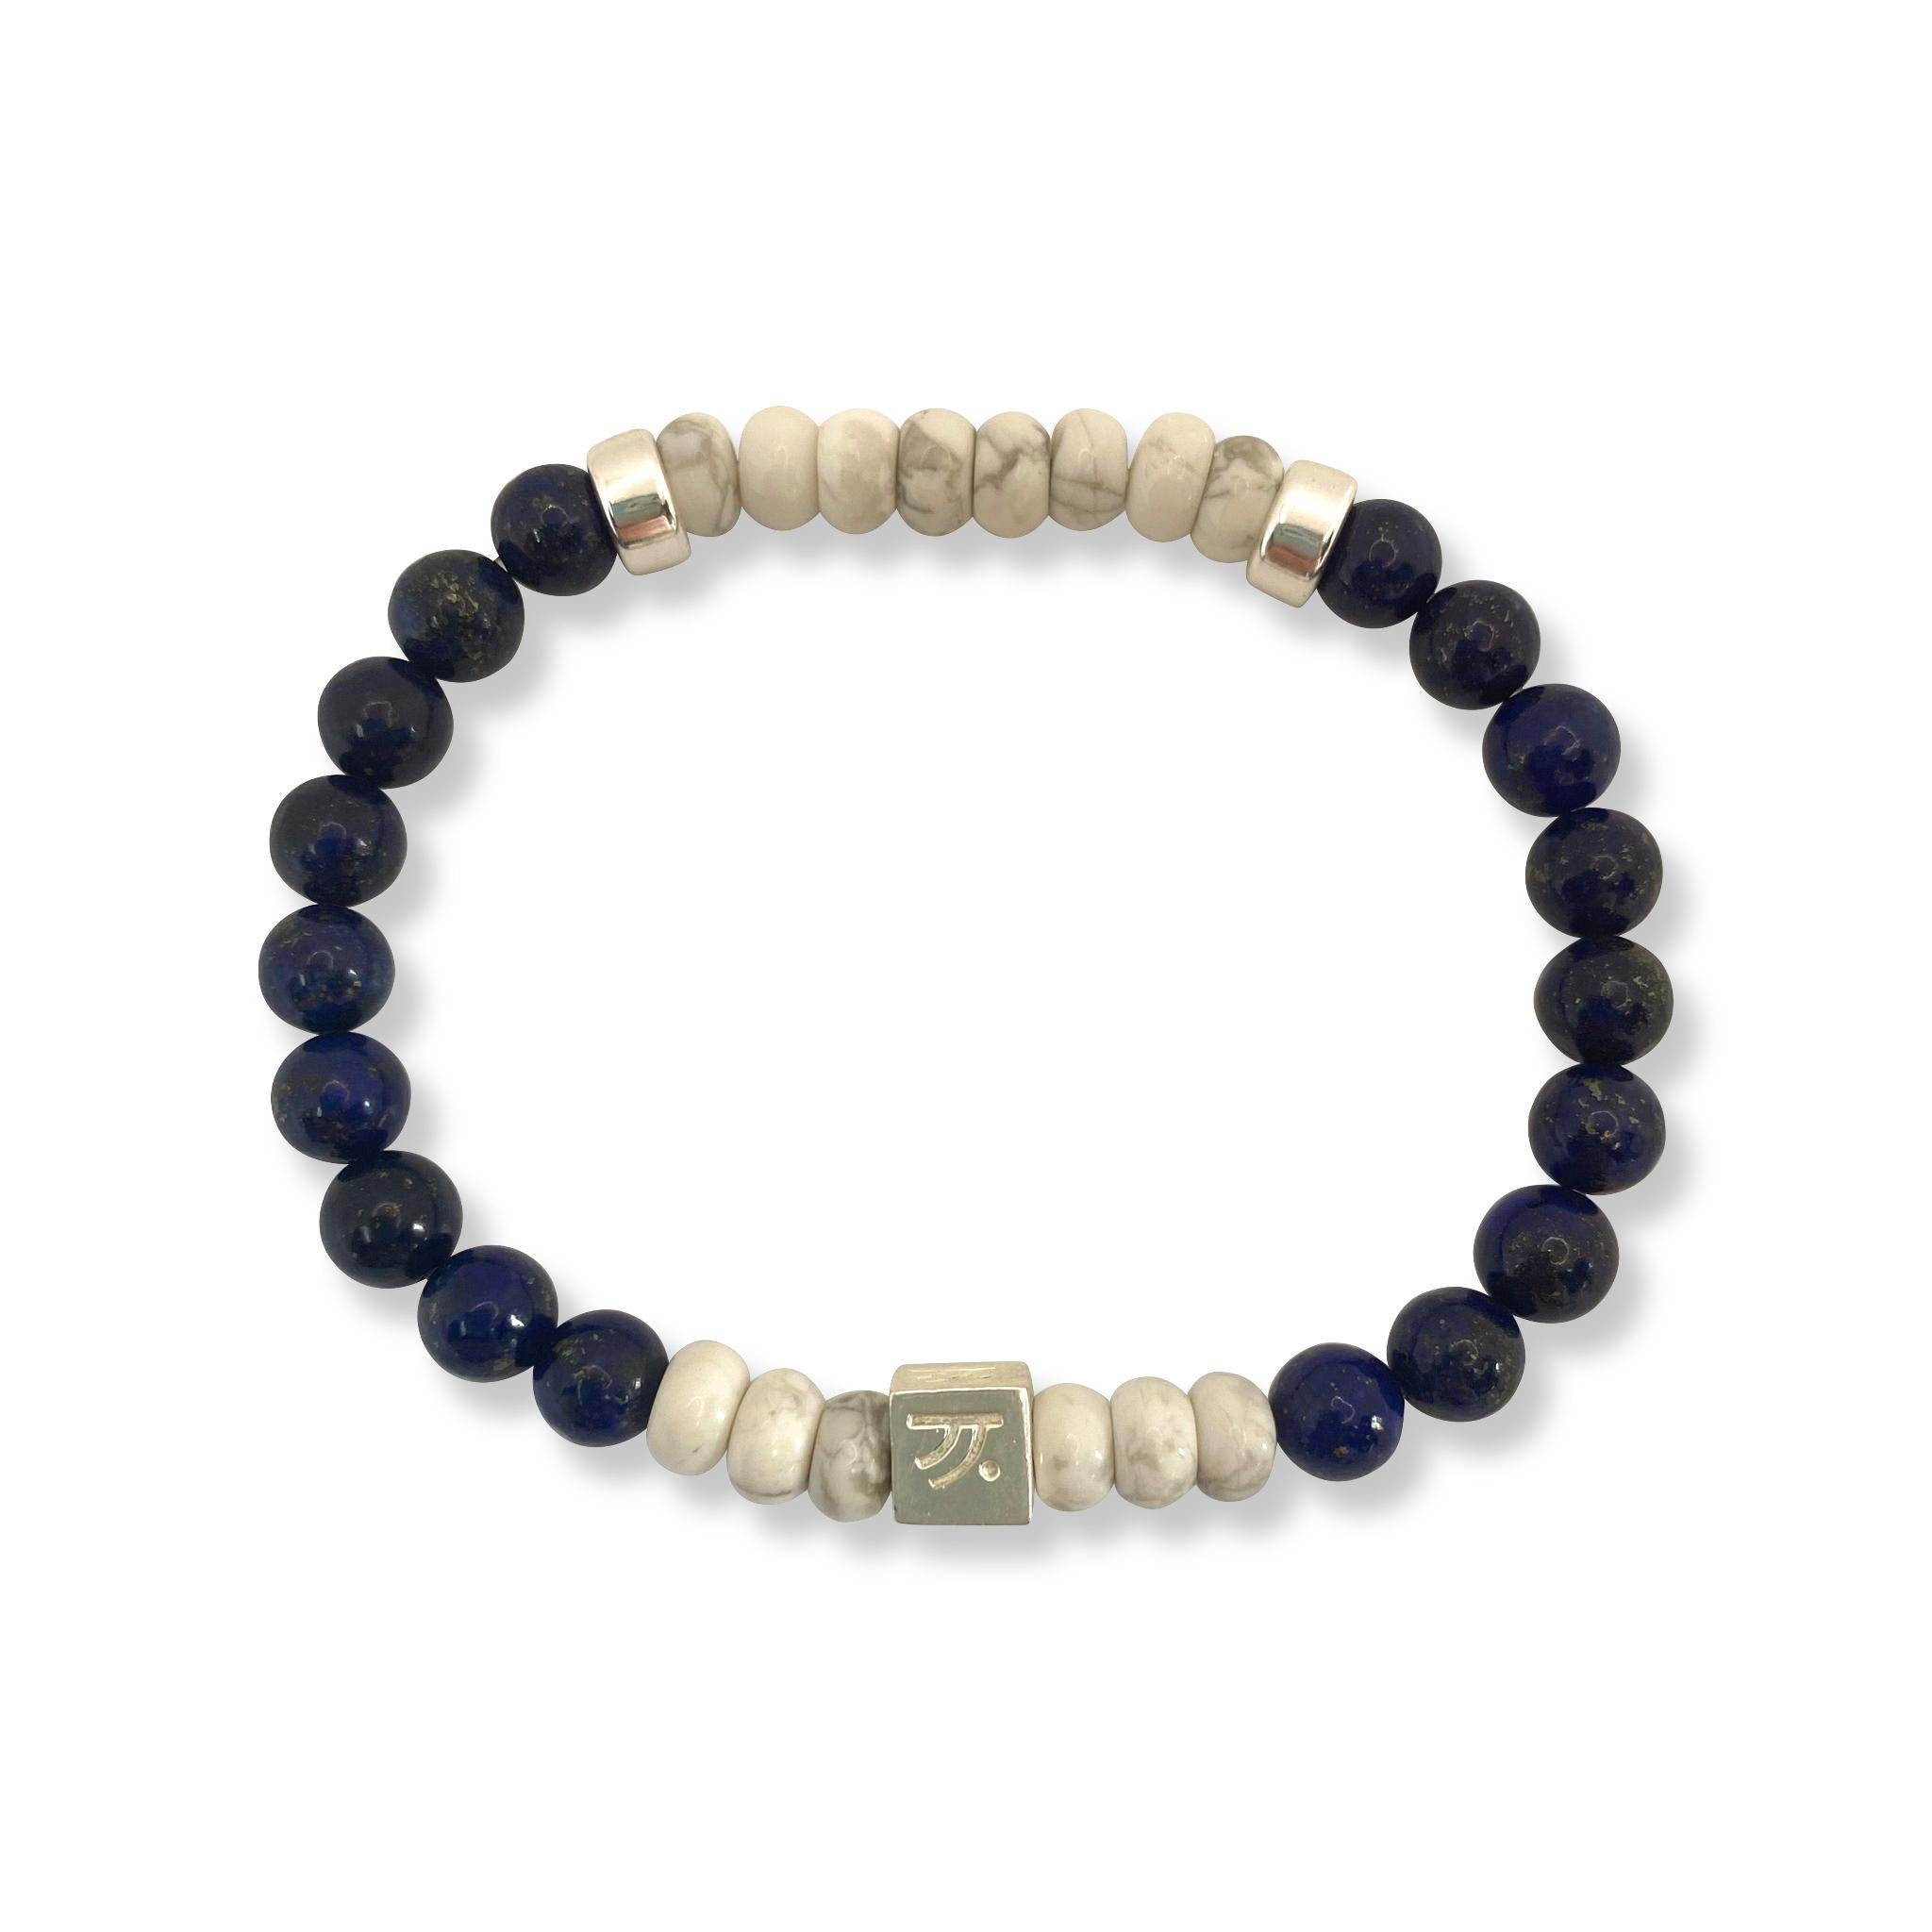 Behind the Jewelry
For those bleeding Dodger blue, we have the perfect bracelet to celebrate a team that continues to make it to the World Series and has a chance to bring the trophy home this year.
The bracelet is unisex.  It is comprised of rich